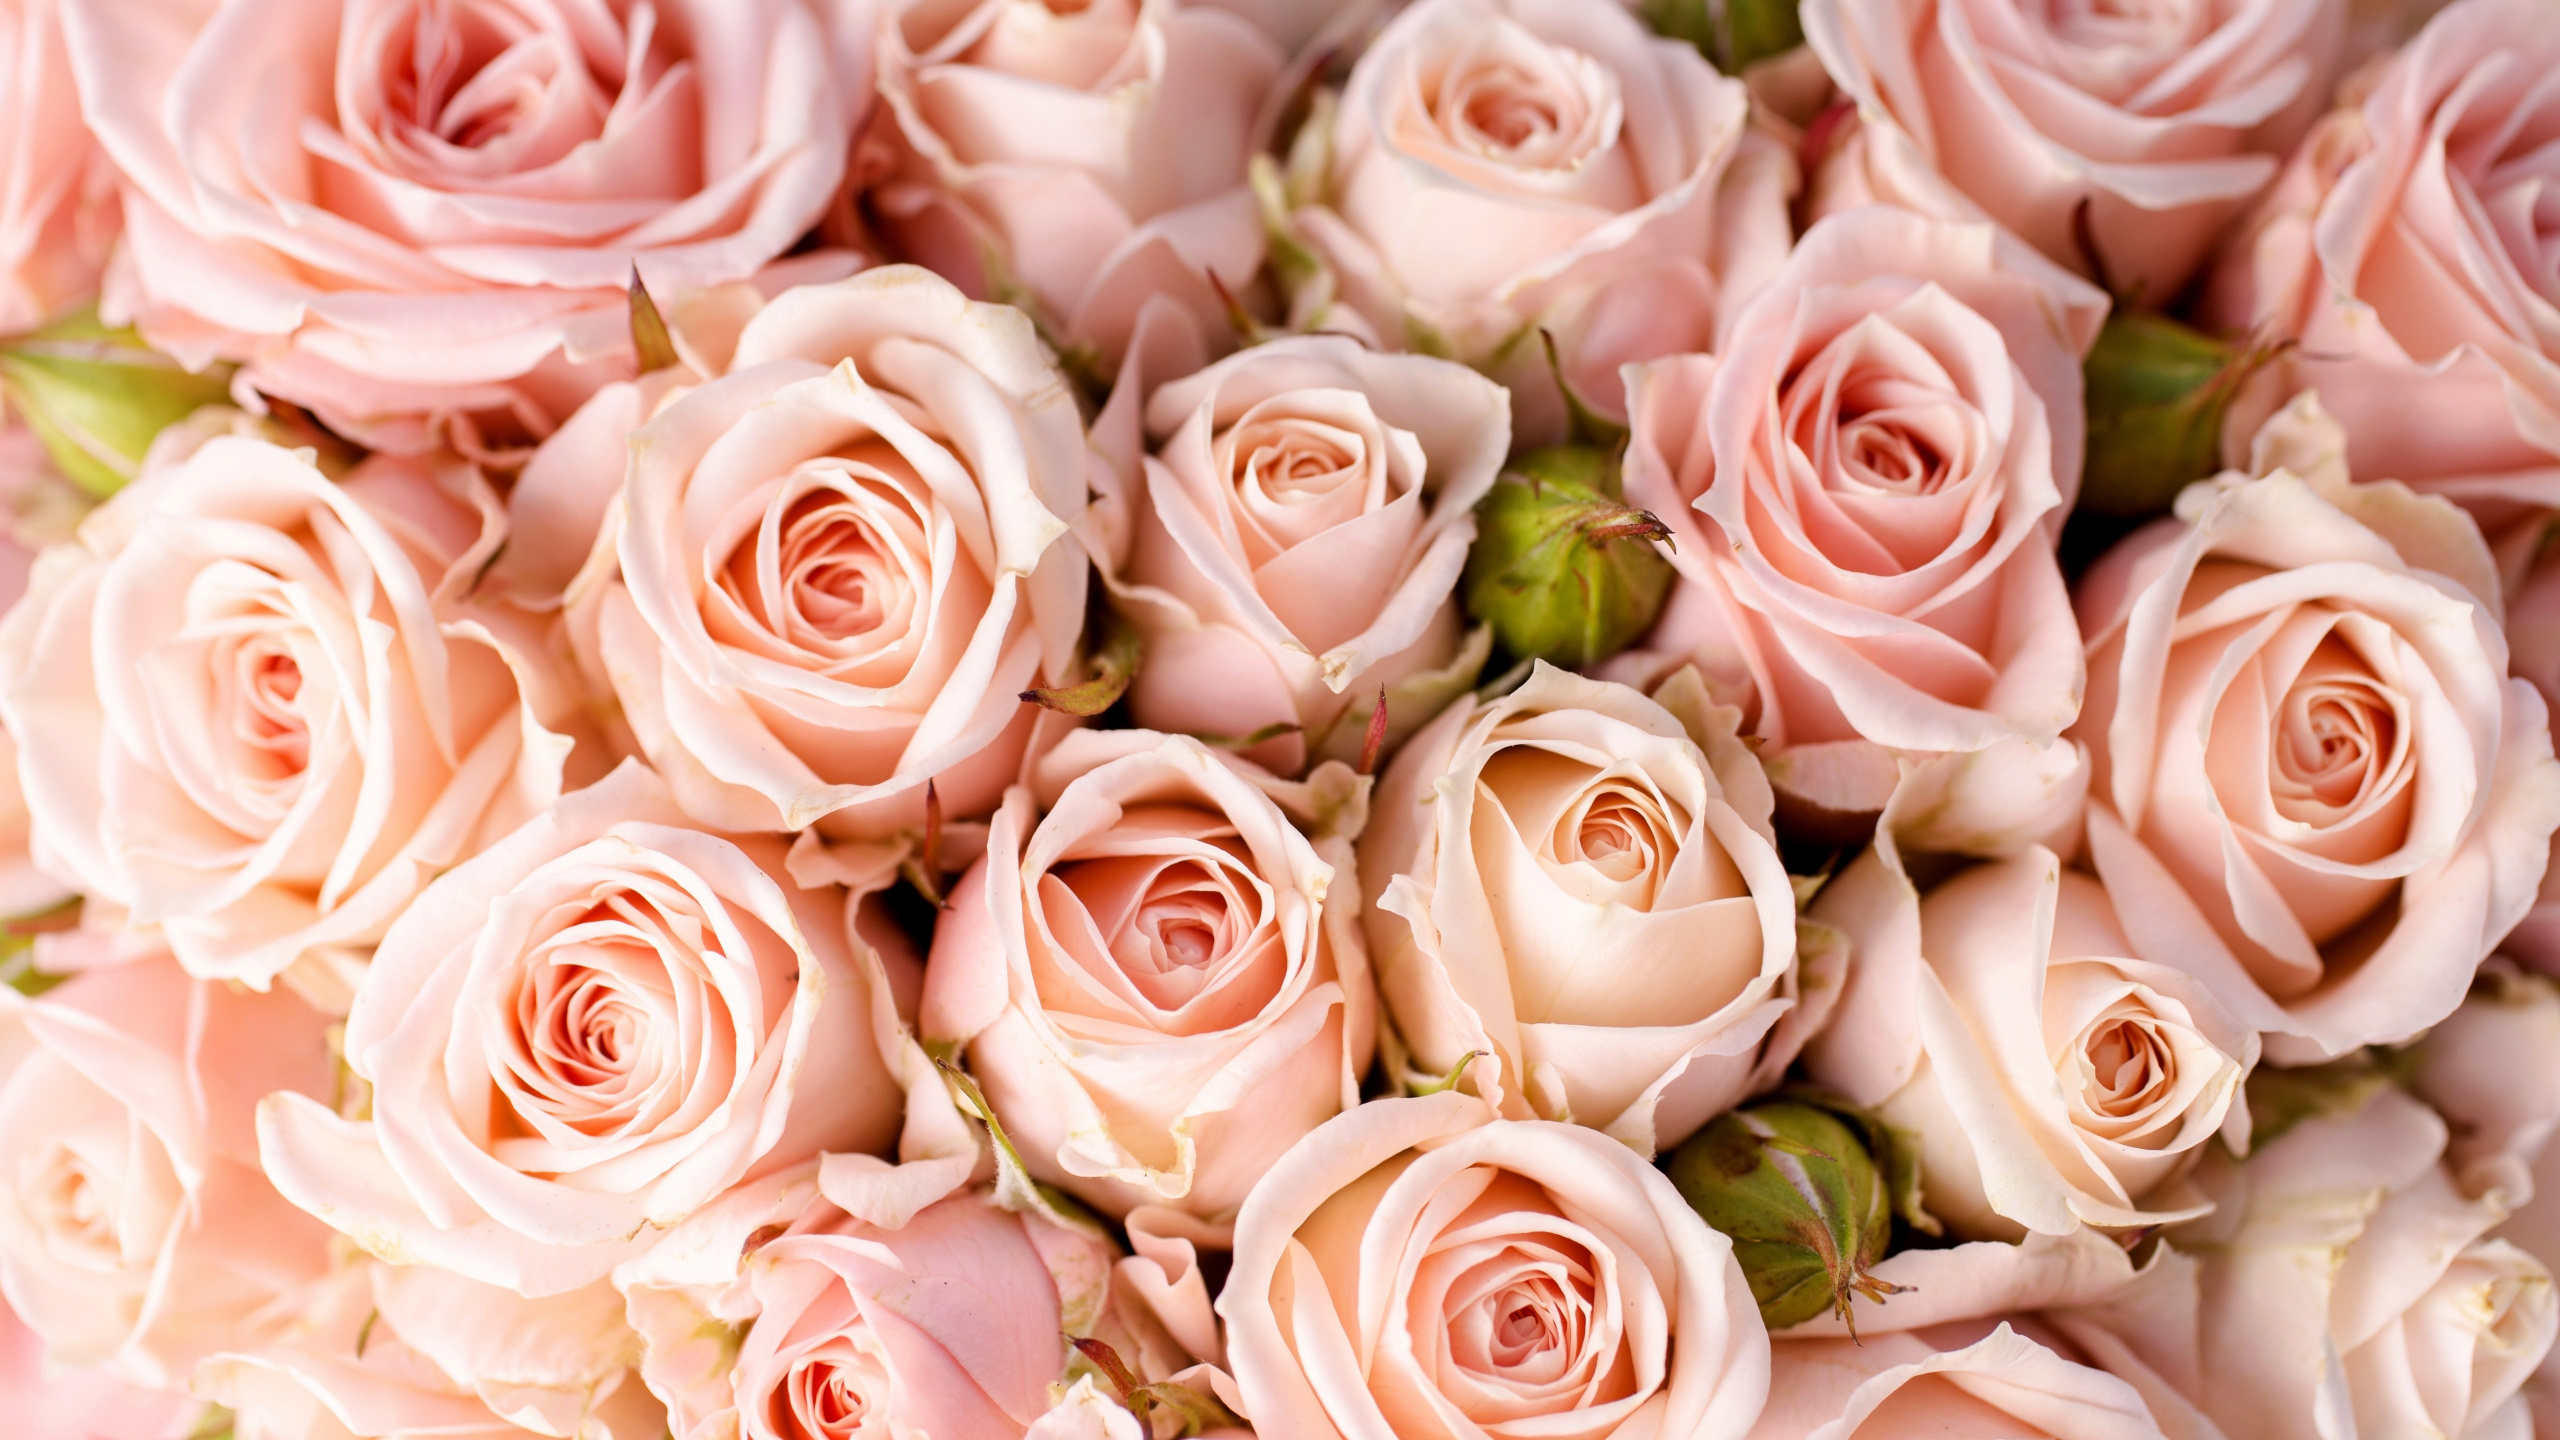 Pink Roses in Close up Photography. Wallpaper in 2560x1440 Resolution